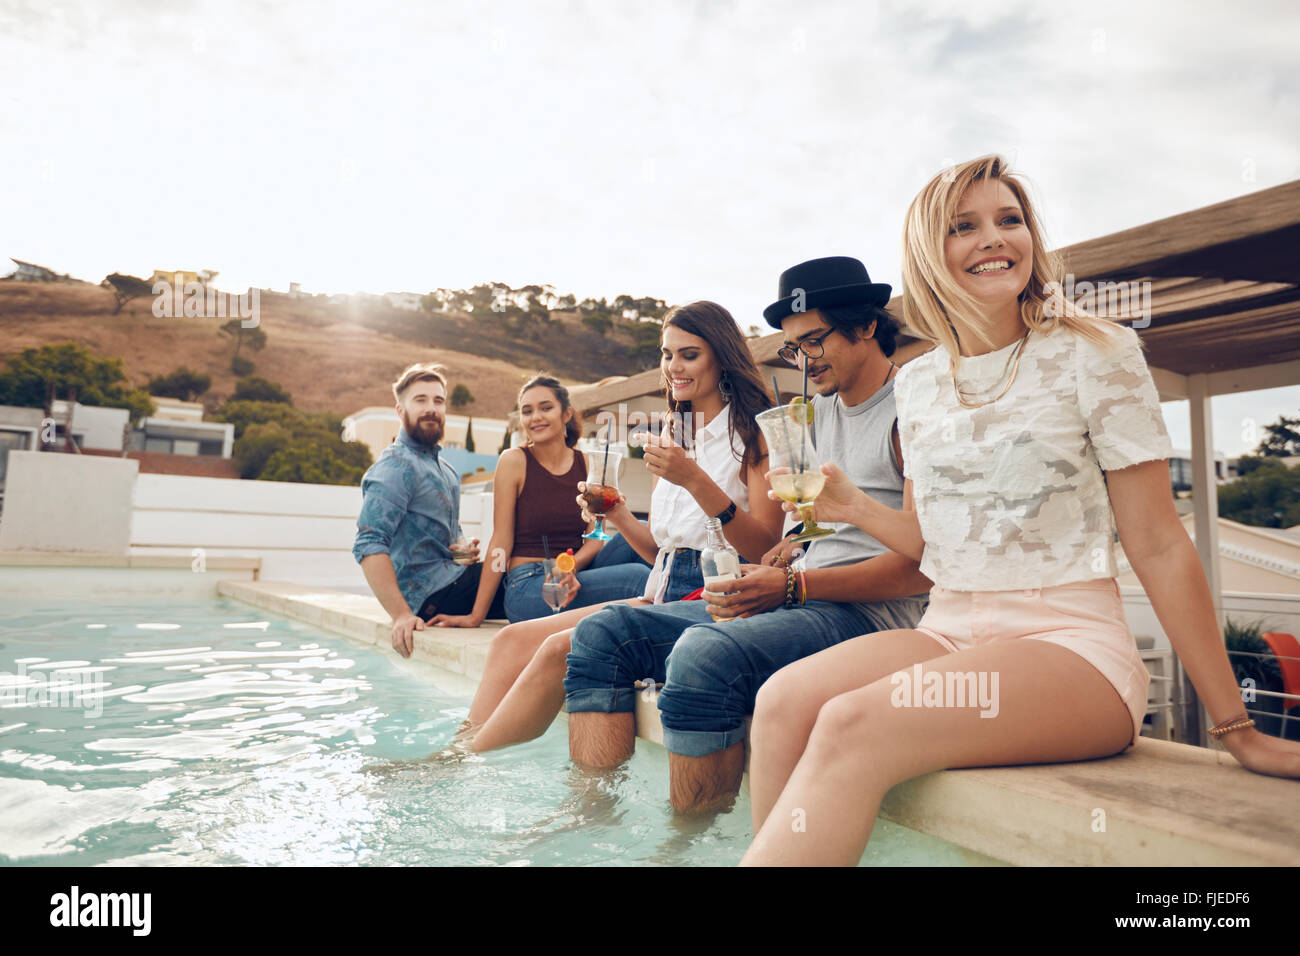 Multi-ethnic group of young people hanging out by swimming pool holding cocktails. Happy friends enjoying party by the pool. Stock Photo